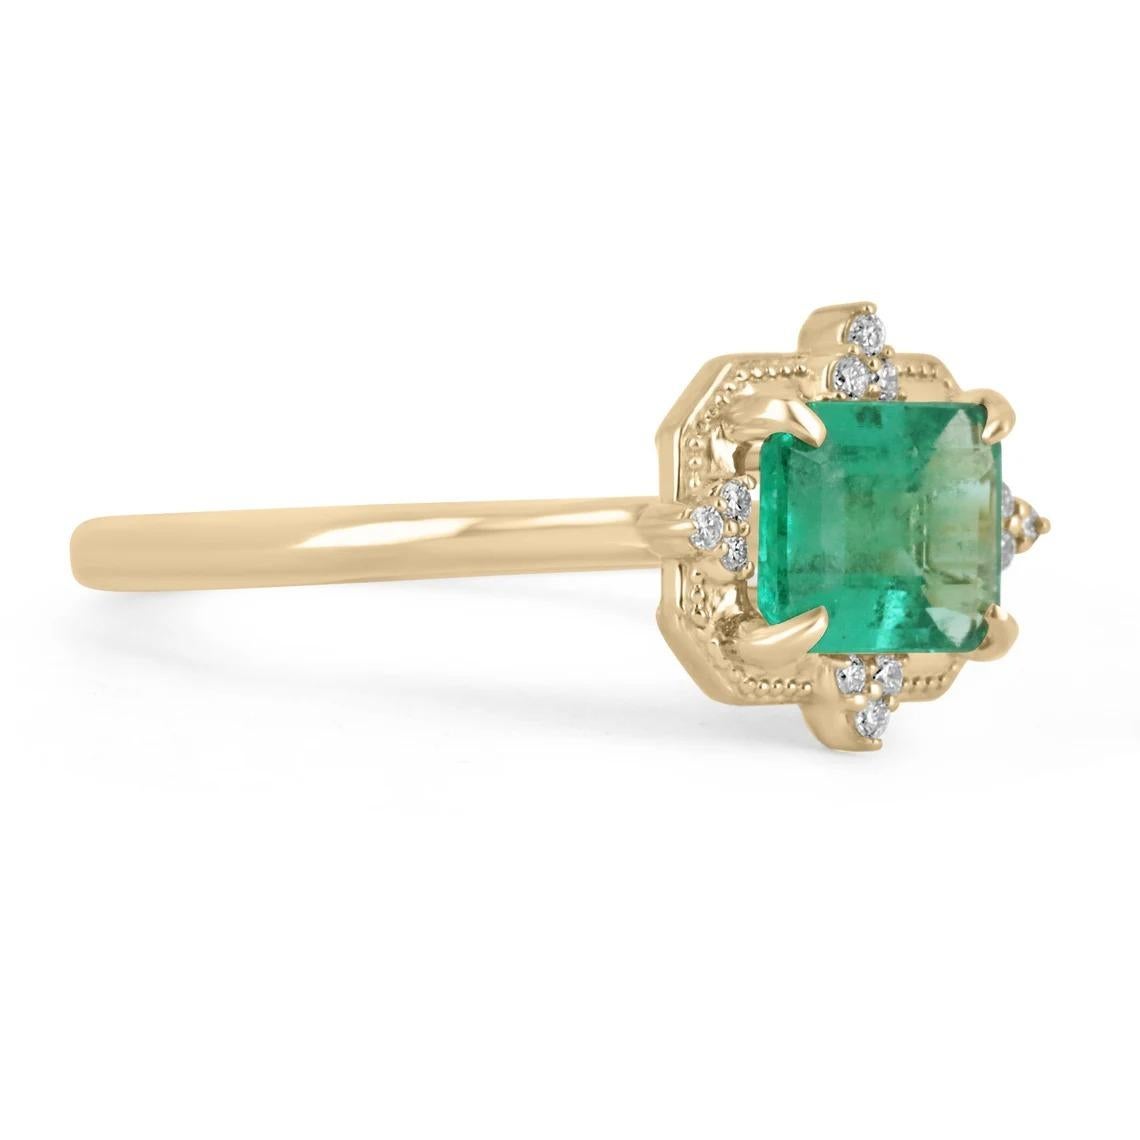 Displayed is a contemporary emerald and diamond engagement ring/right-hand ring in 14K yellow gold. This gorgeous ring carries a full 1.26-carat emerald in a secure four-prong setting. Fully faceted, this gemstone showcases excellent shine and